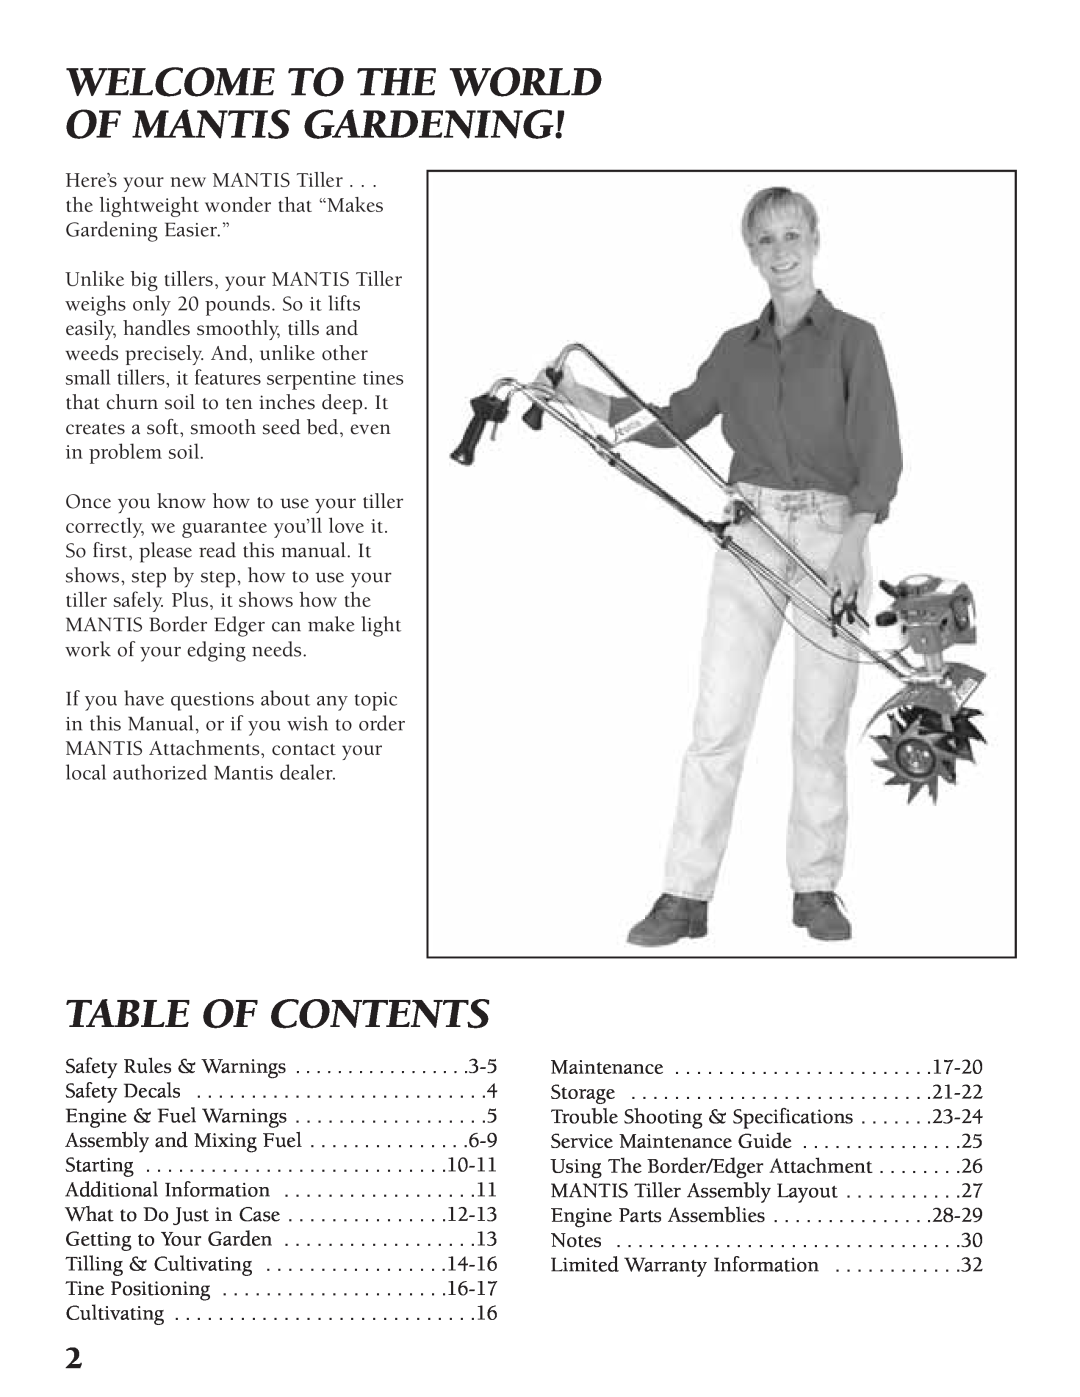 Little Wonder Tiller/Cultivator owner manual Welcome To The World Of Mantis Gardening, Table Of Contents 